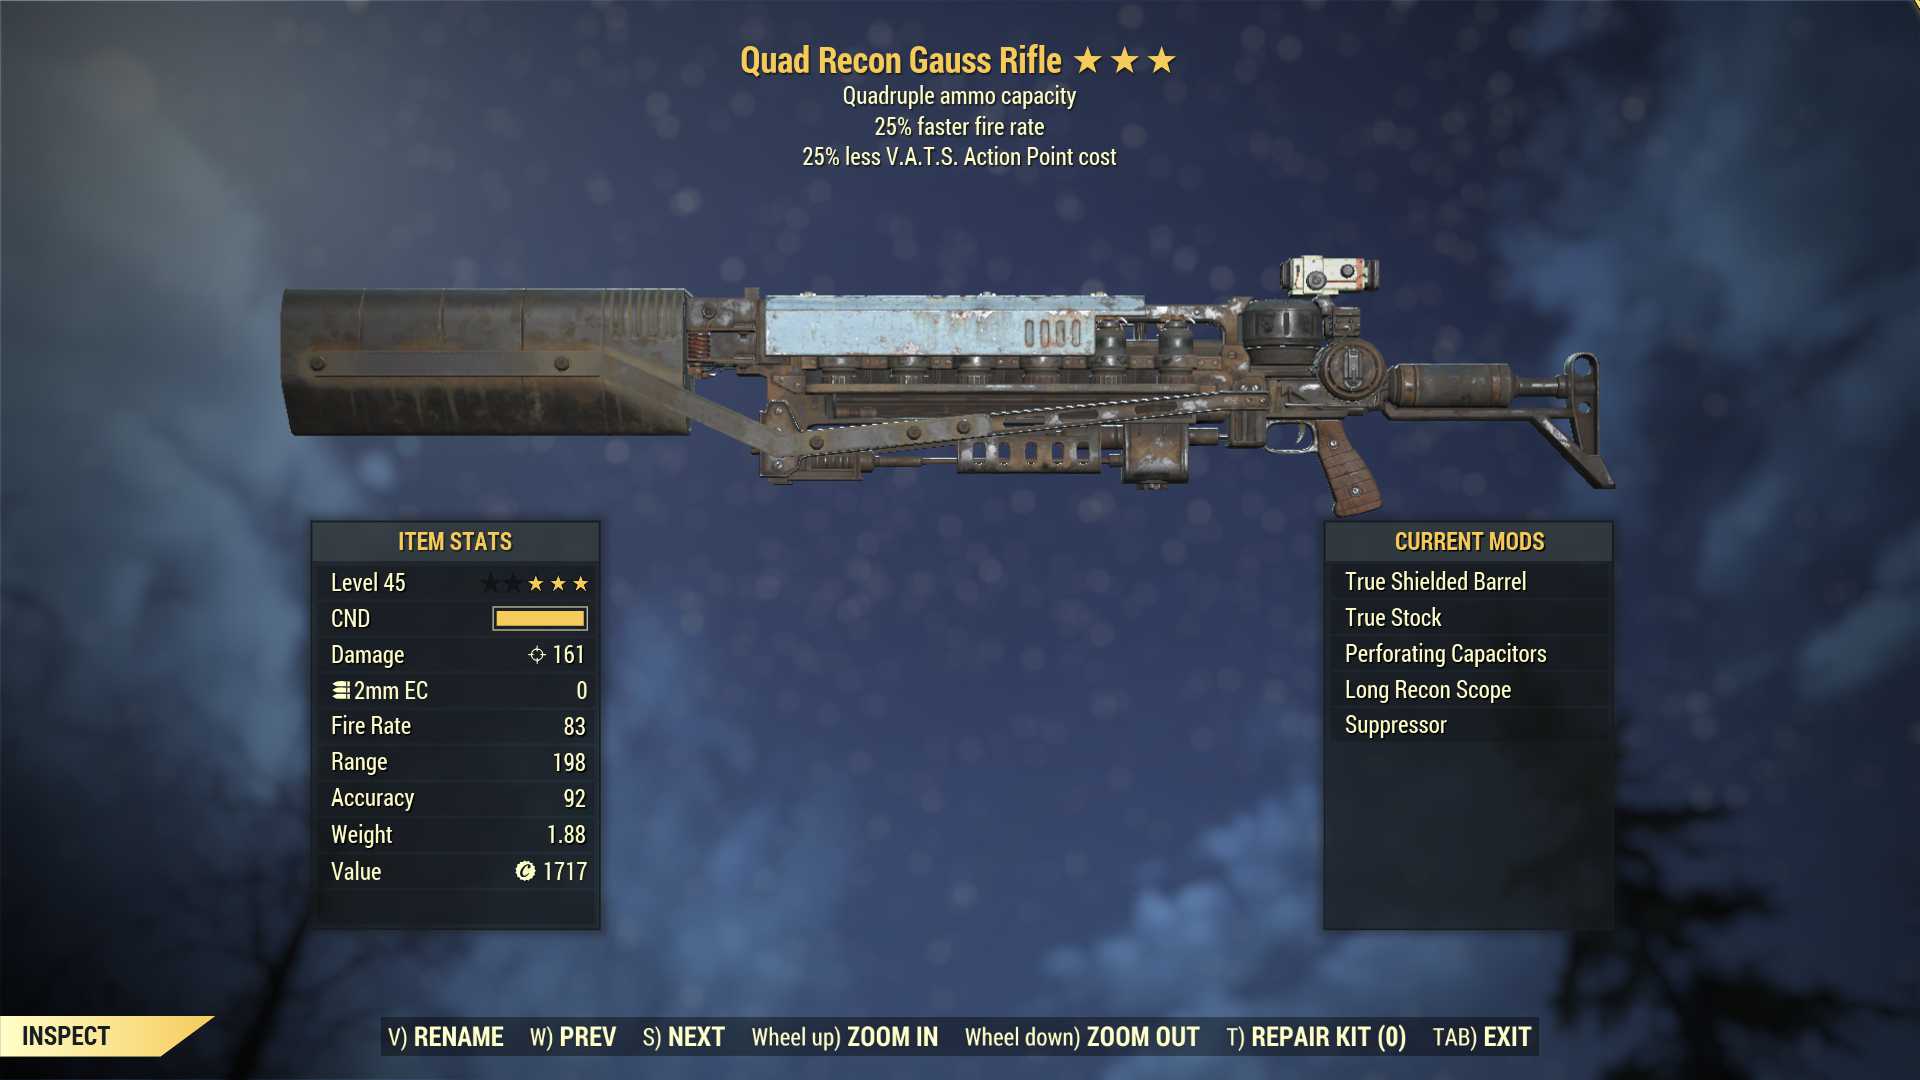 Quad Gauss Rifle (25% faster fire rate, 25% less VATS AP cost)